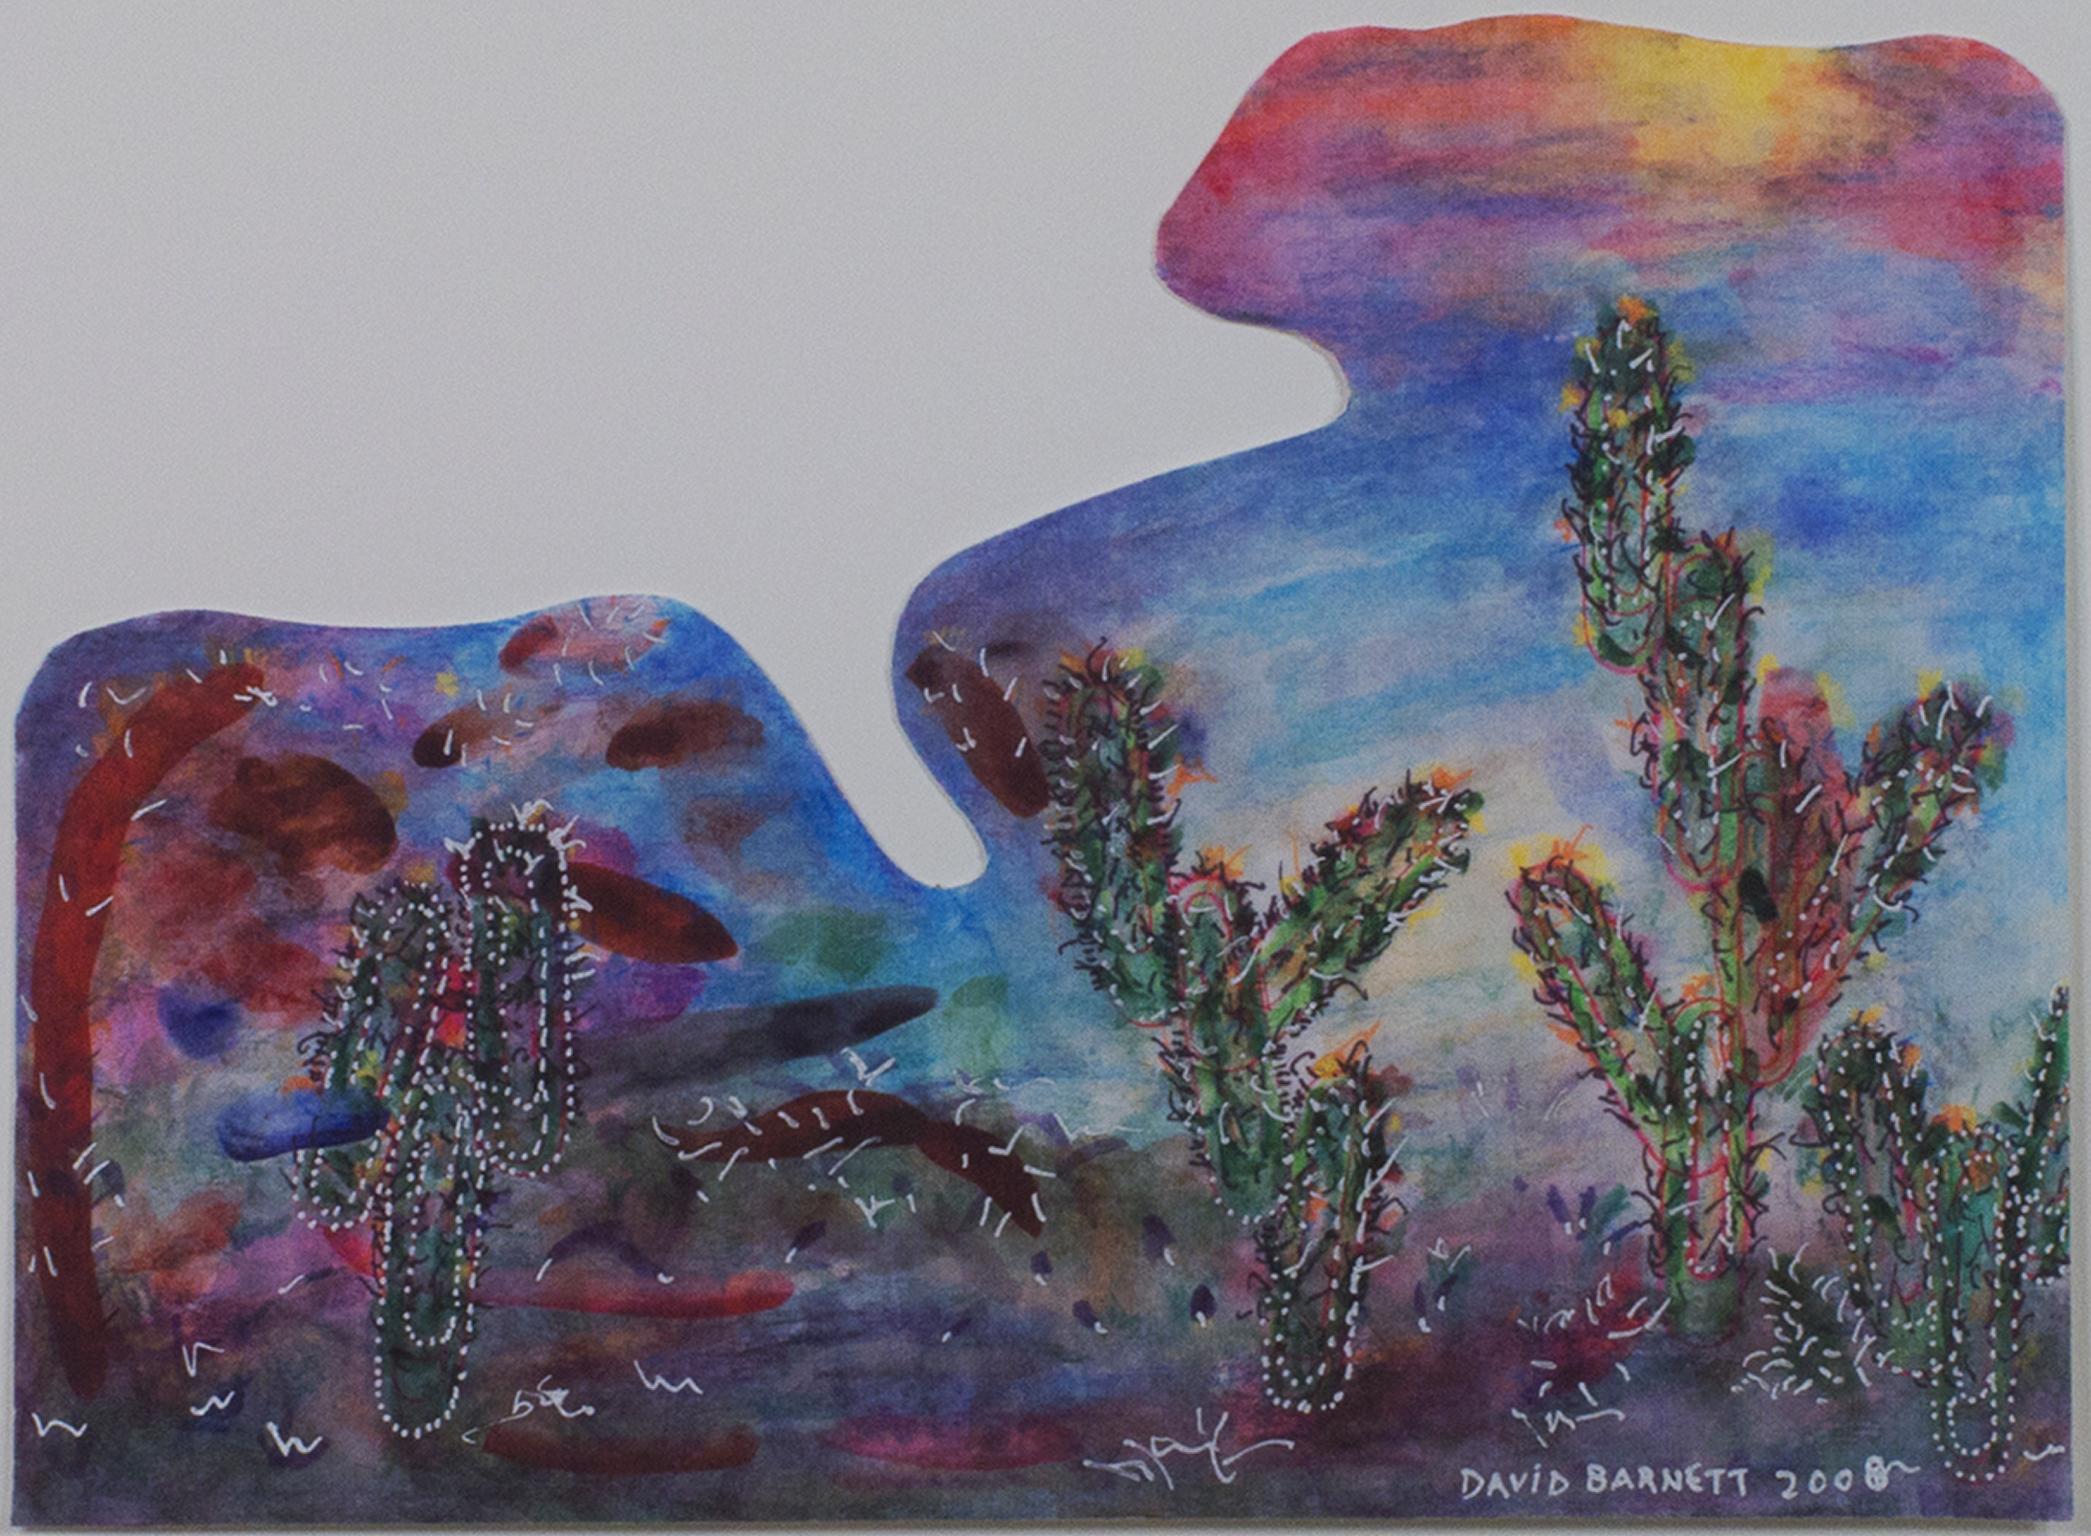 "Southwest Sunset Paper Clip Cactus Palette" is an original, playful mixed media piece on watercolor paper by David Barnett, signed and dated in the lower right. Against a vivid red, yellow, and blue background, green cacti composed of paperclips